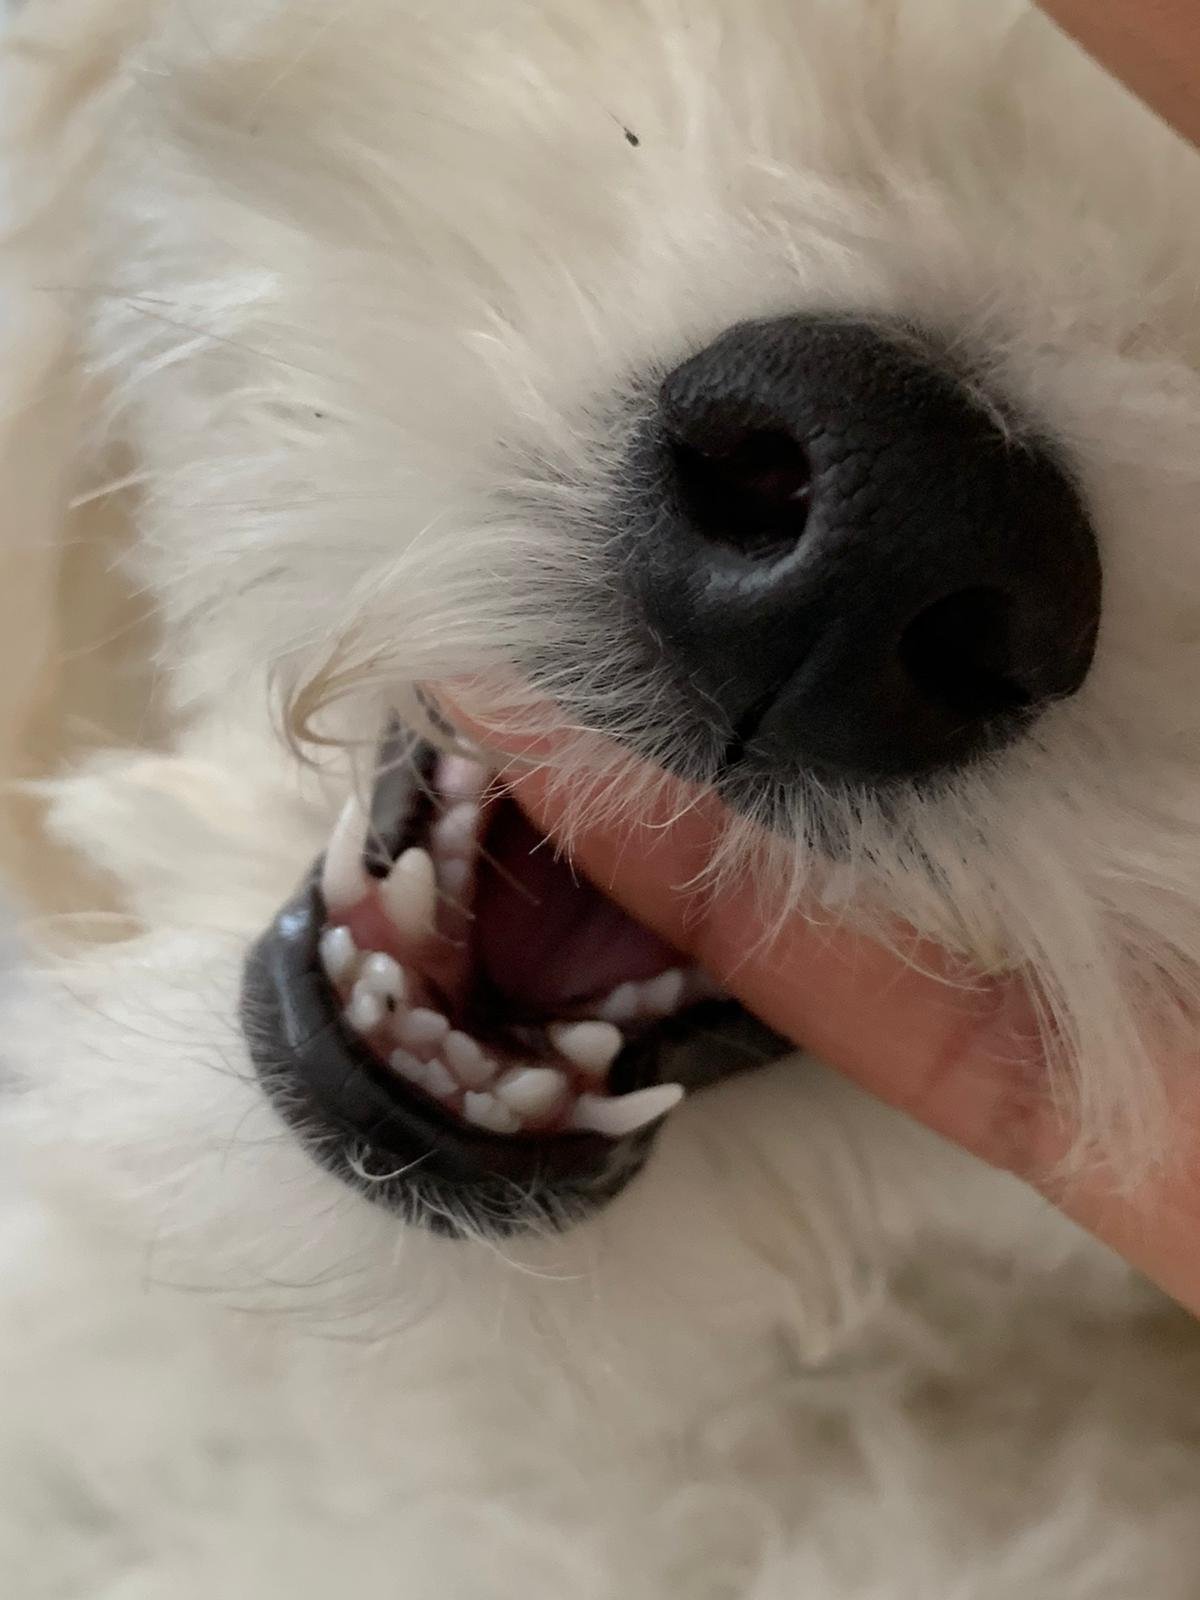 Poodle Dental Care | Taking Care of Your Poodle's Teeth